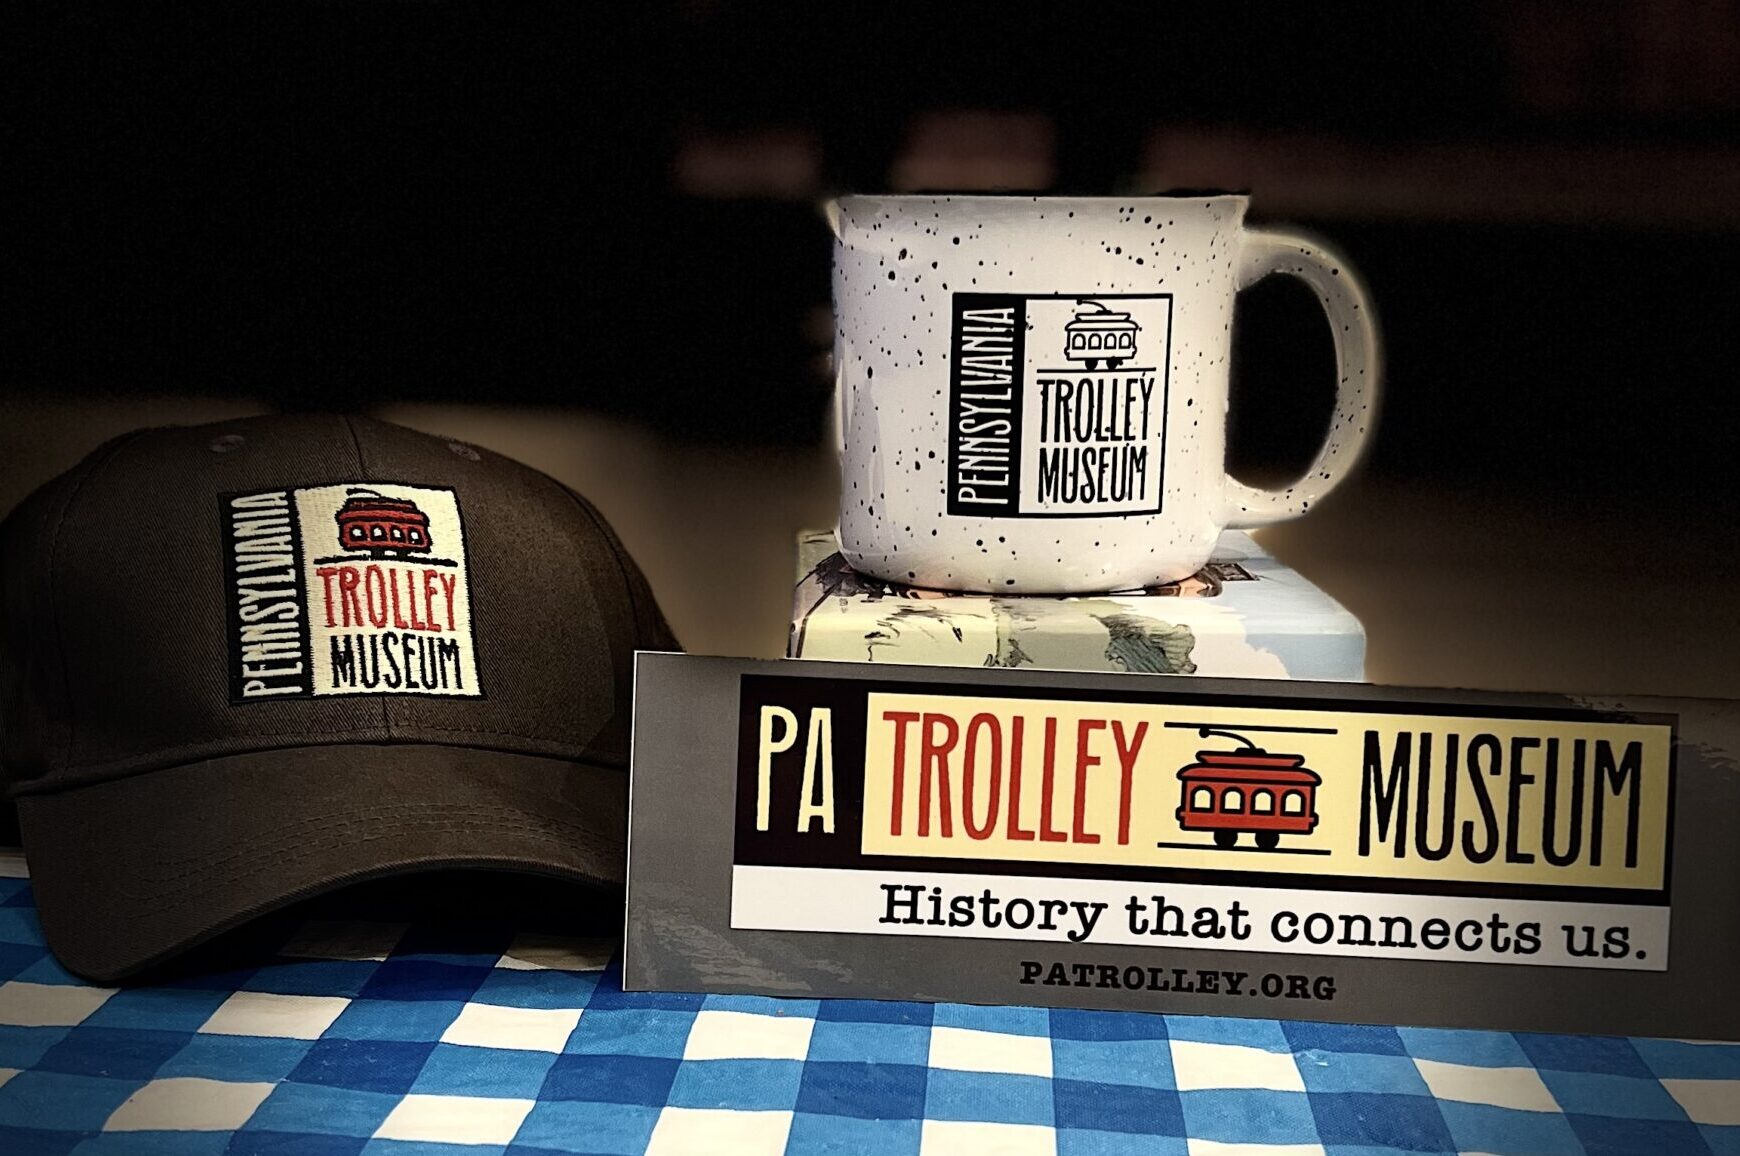 A gray ball cap with the Pennsylvania Trolley Museum logo in the center is at the left of the image, to the front right of the image is a bumper sticker with a gray background and the horizontal version of the Pennsylvania Trolley Museum logo featured. To the back right is a white mug with black speckled paint and the Pennsylvania Trolley Museum logo in all black is featured.